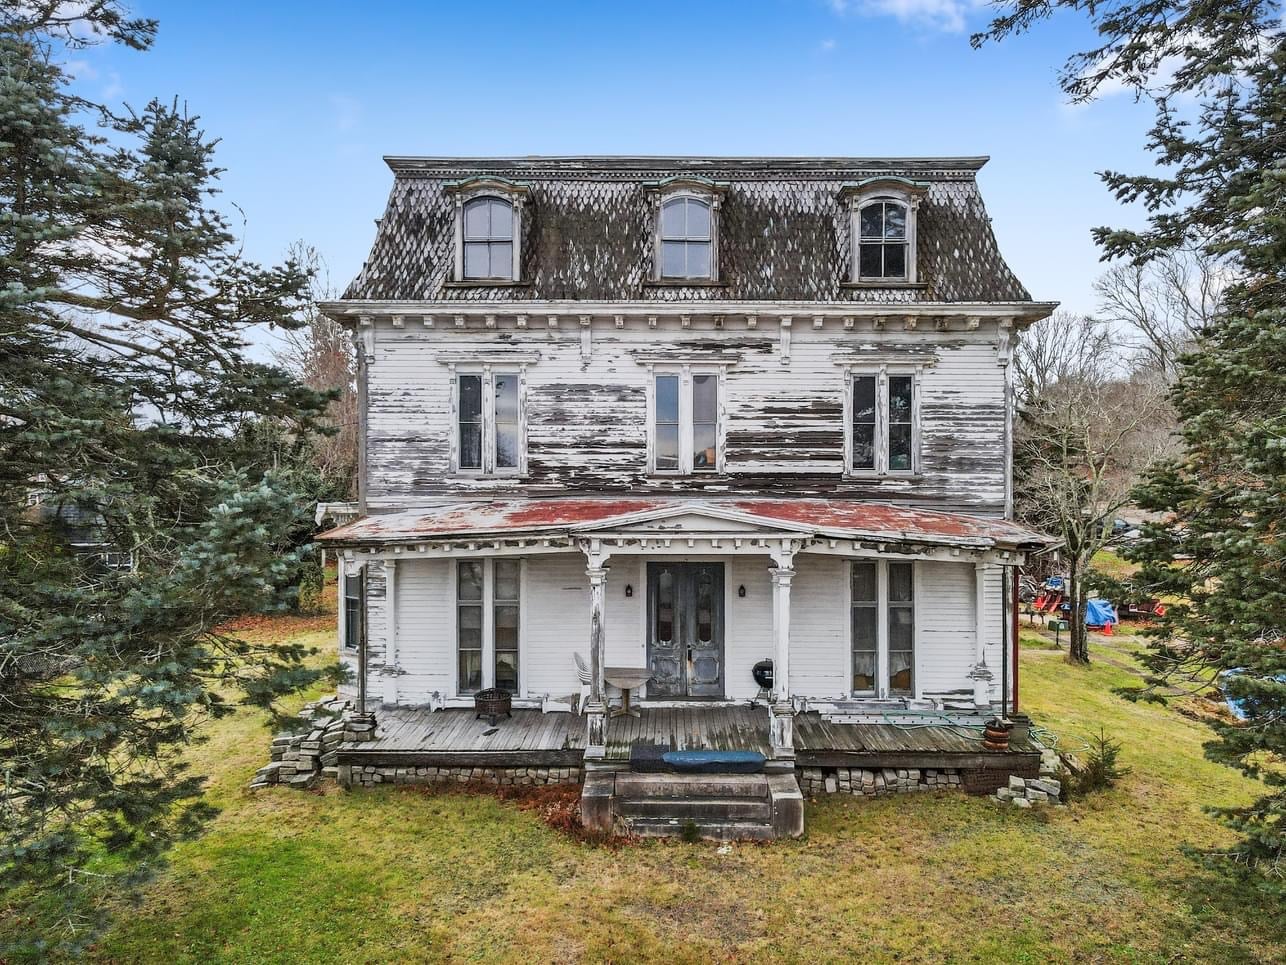 1870 Fixer-Upper For Sale In Pawcatuck Connecticut